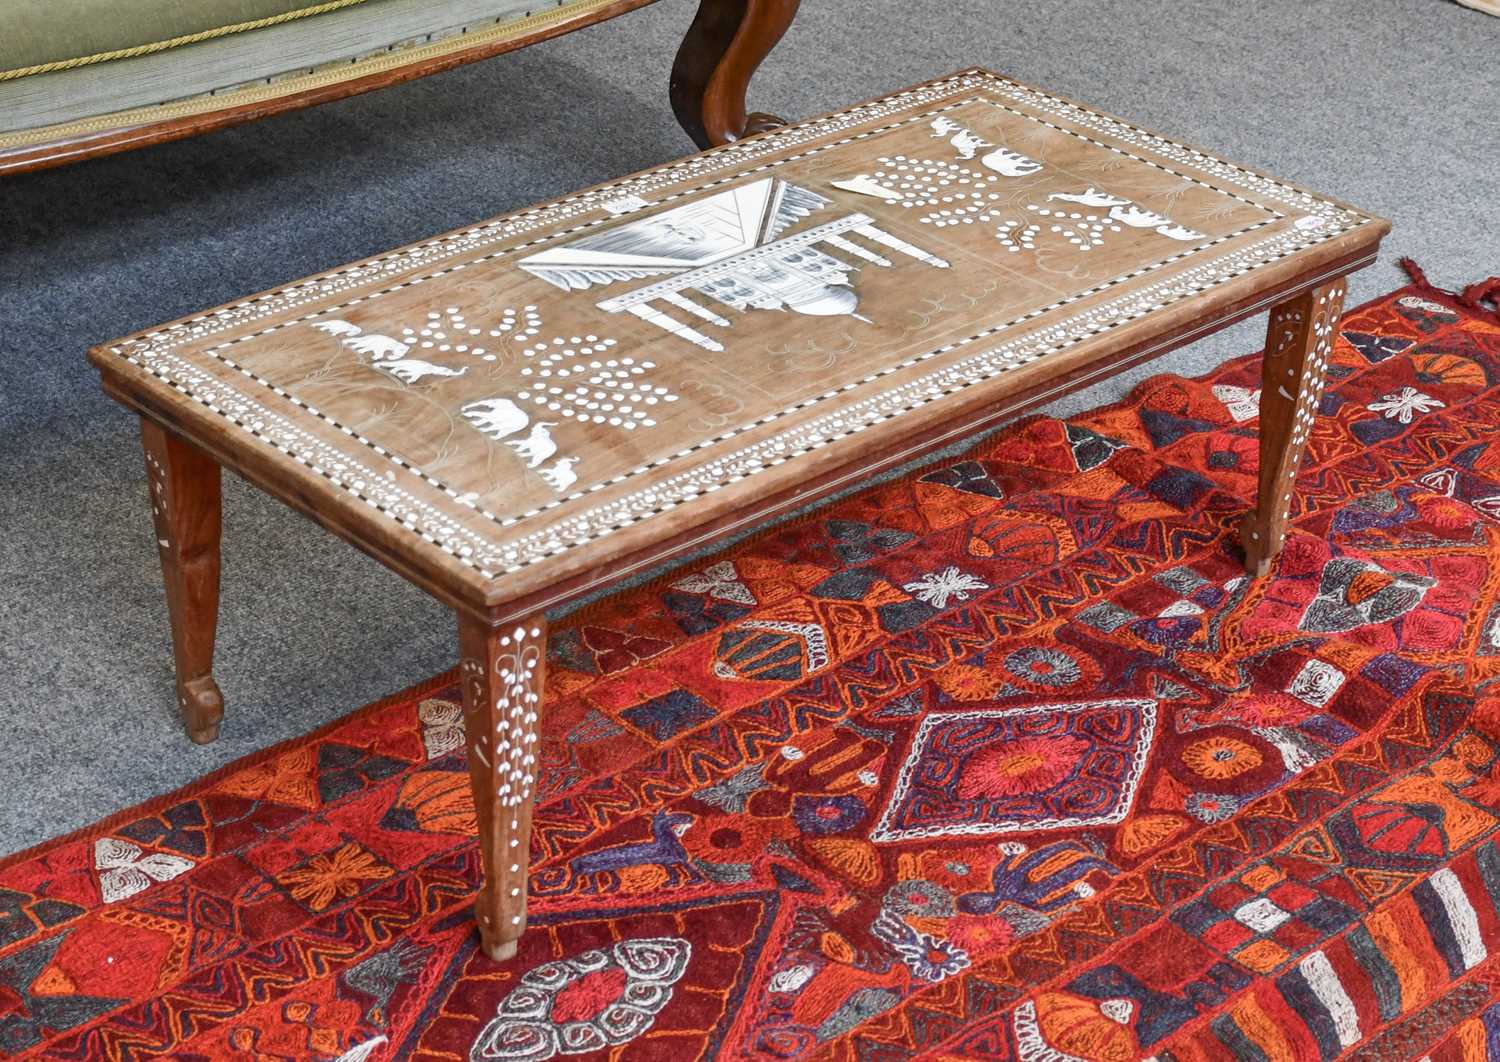 An Indian Hardwood Inlaid Coffee Table, decorated with the Taj Mahal and elephants, 101cm by 50cm by - Image 2 of 2